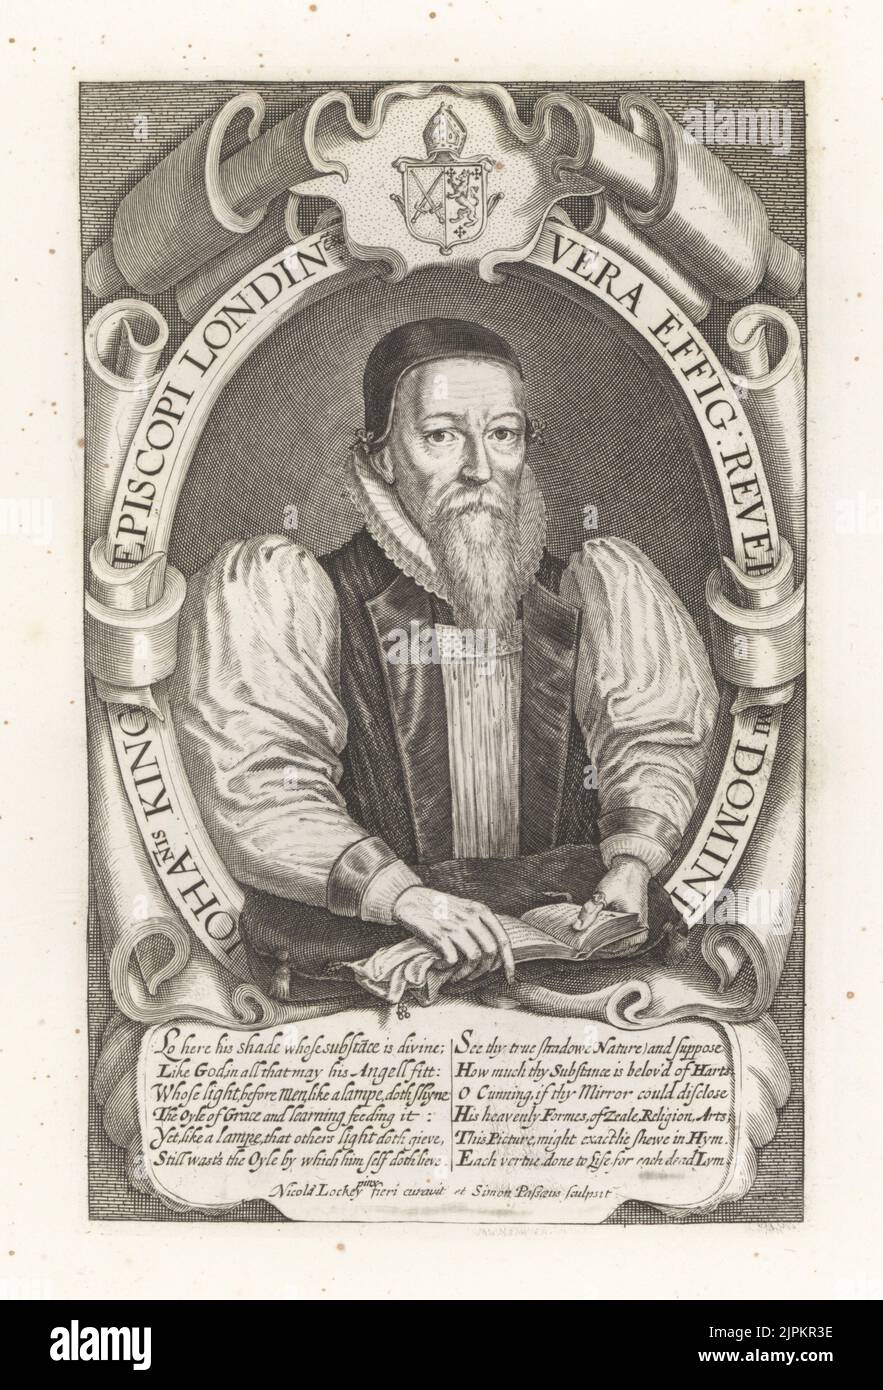 John King, Bishop of London, died 1621. In skull cap, ruff collar, ecclesiastical robes, holding a book and gloves. Johanis King Episcopi Londinensis. Copperplate engraving by Simon Pass after a painting by Nicholas Lockey from Samuel Woodburn’s Gallery of Rare Portraits Consisting of Original Plates, George Jones, 102 St Martin’s Lane, London, 1816. Stock Photo